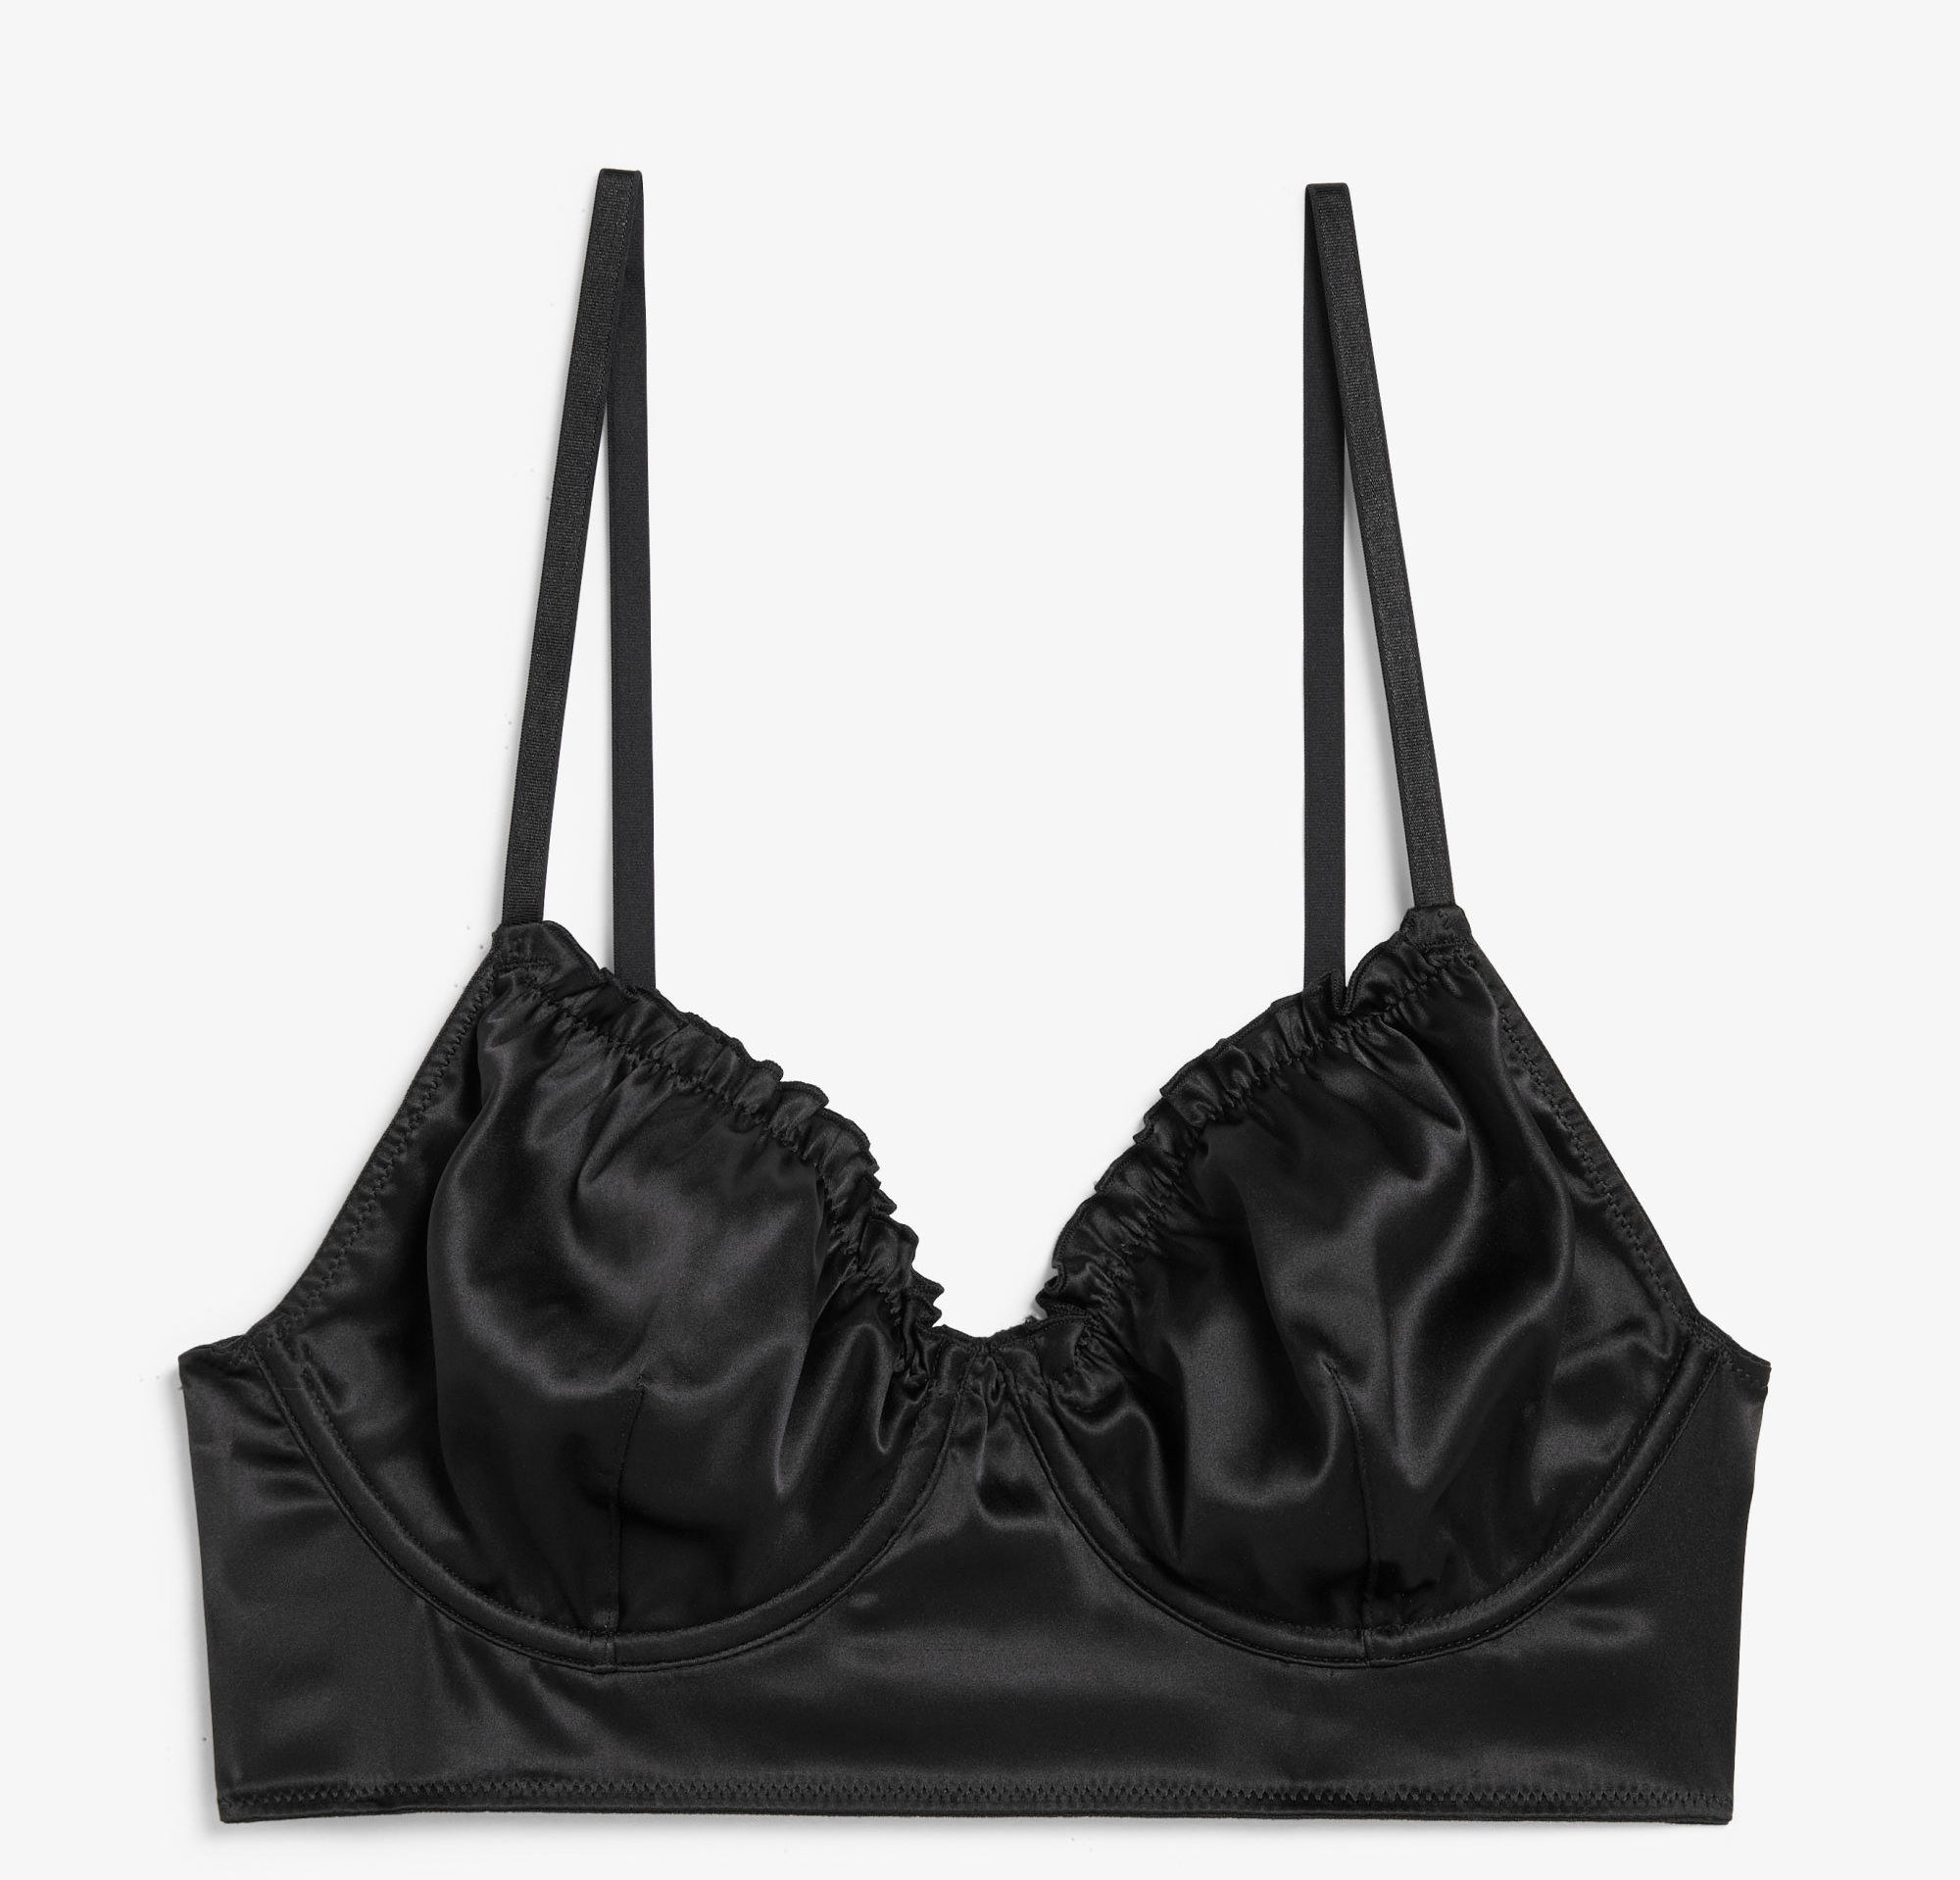 Monki Have Some Pretty Amazing And Affordable Lingerie And I Just Thought You Should Know